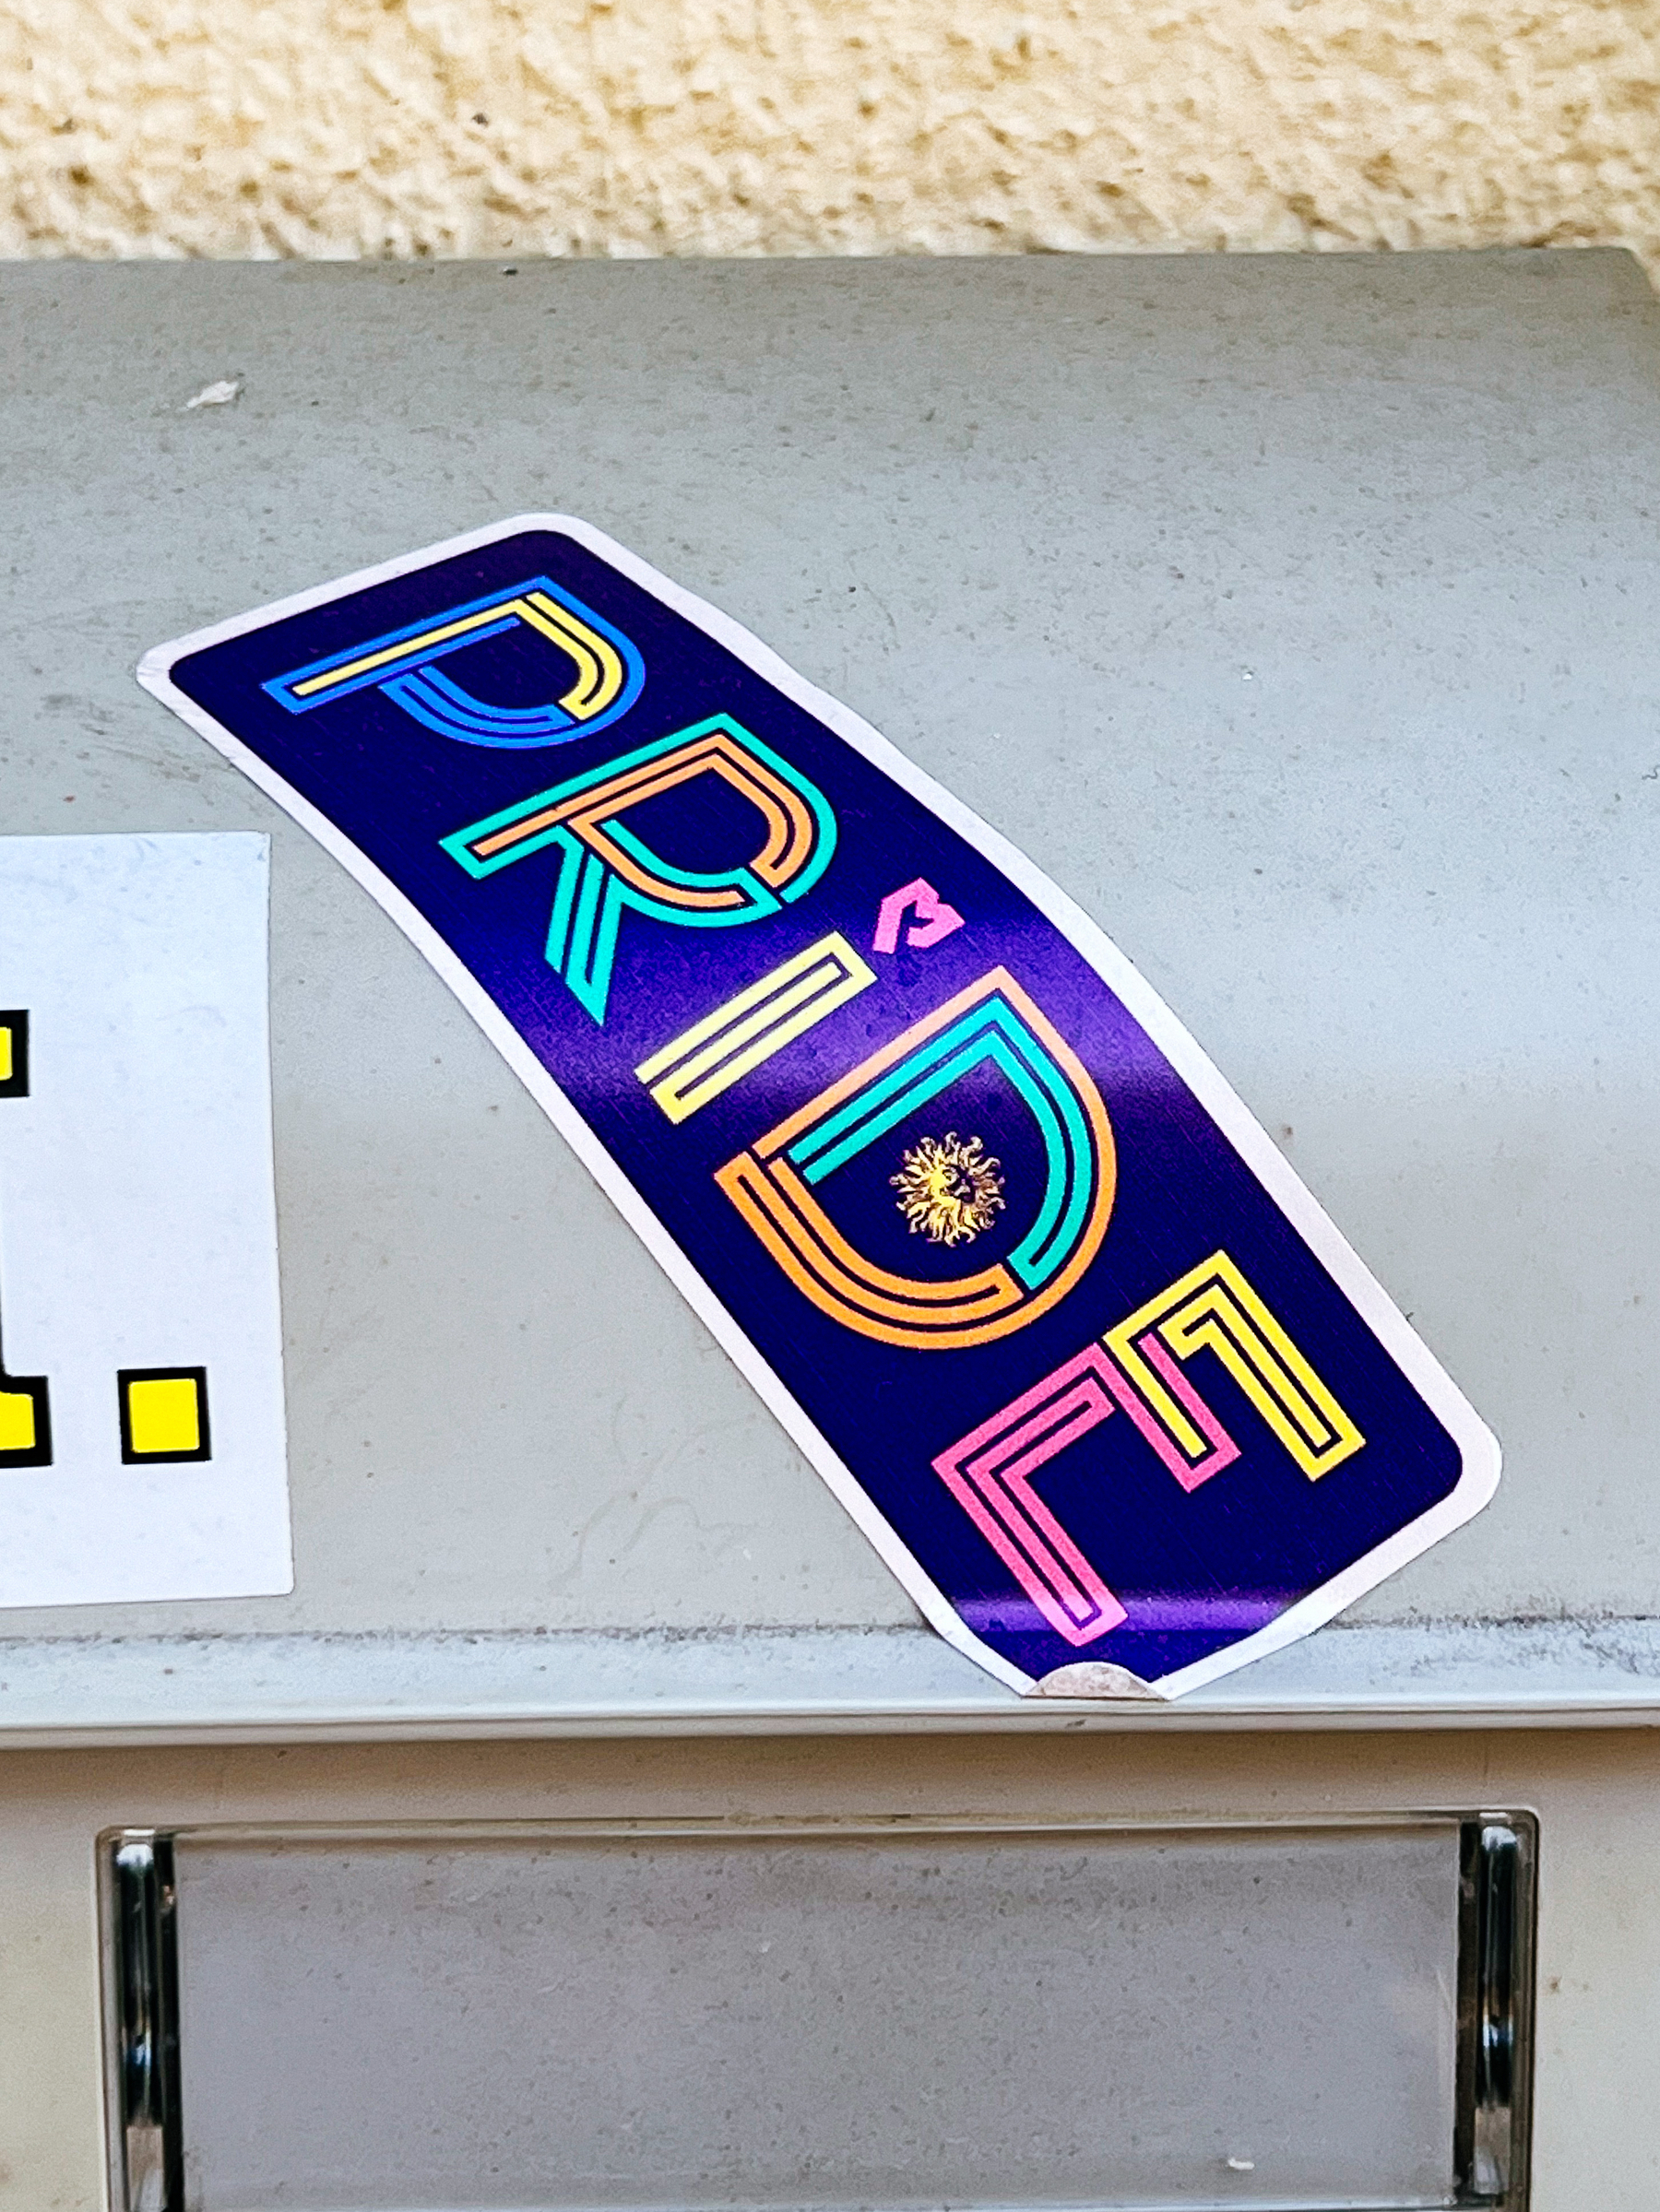 A sticker with the word “PRIDE”